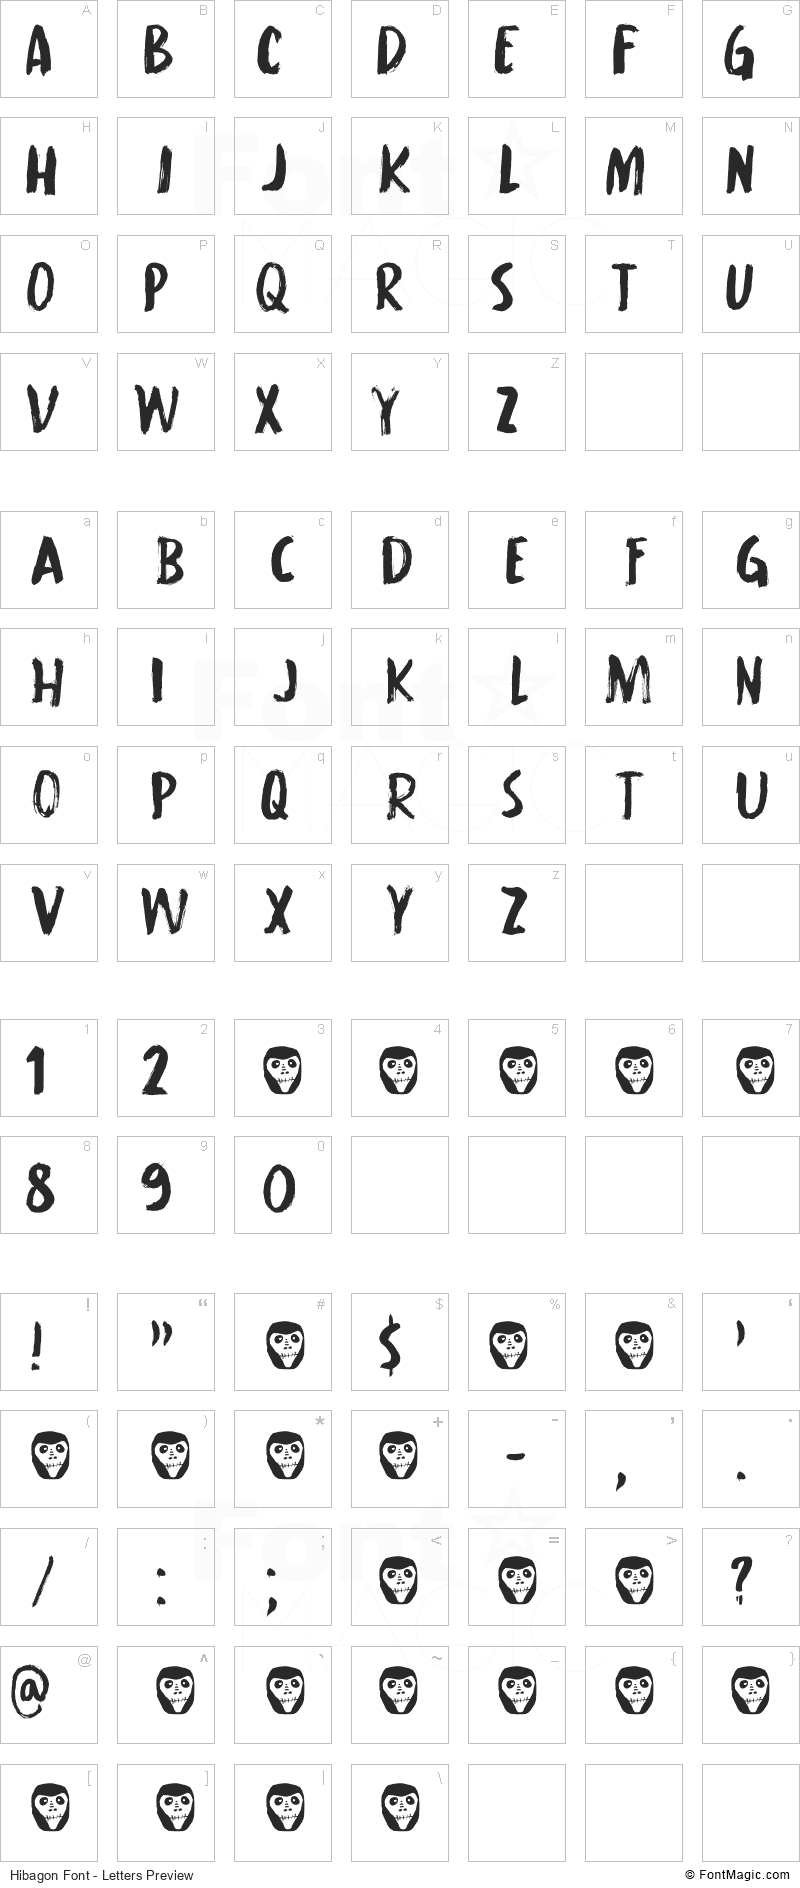 Hibagon Font - All Latters Preview Chart